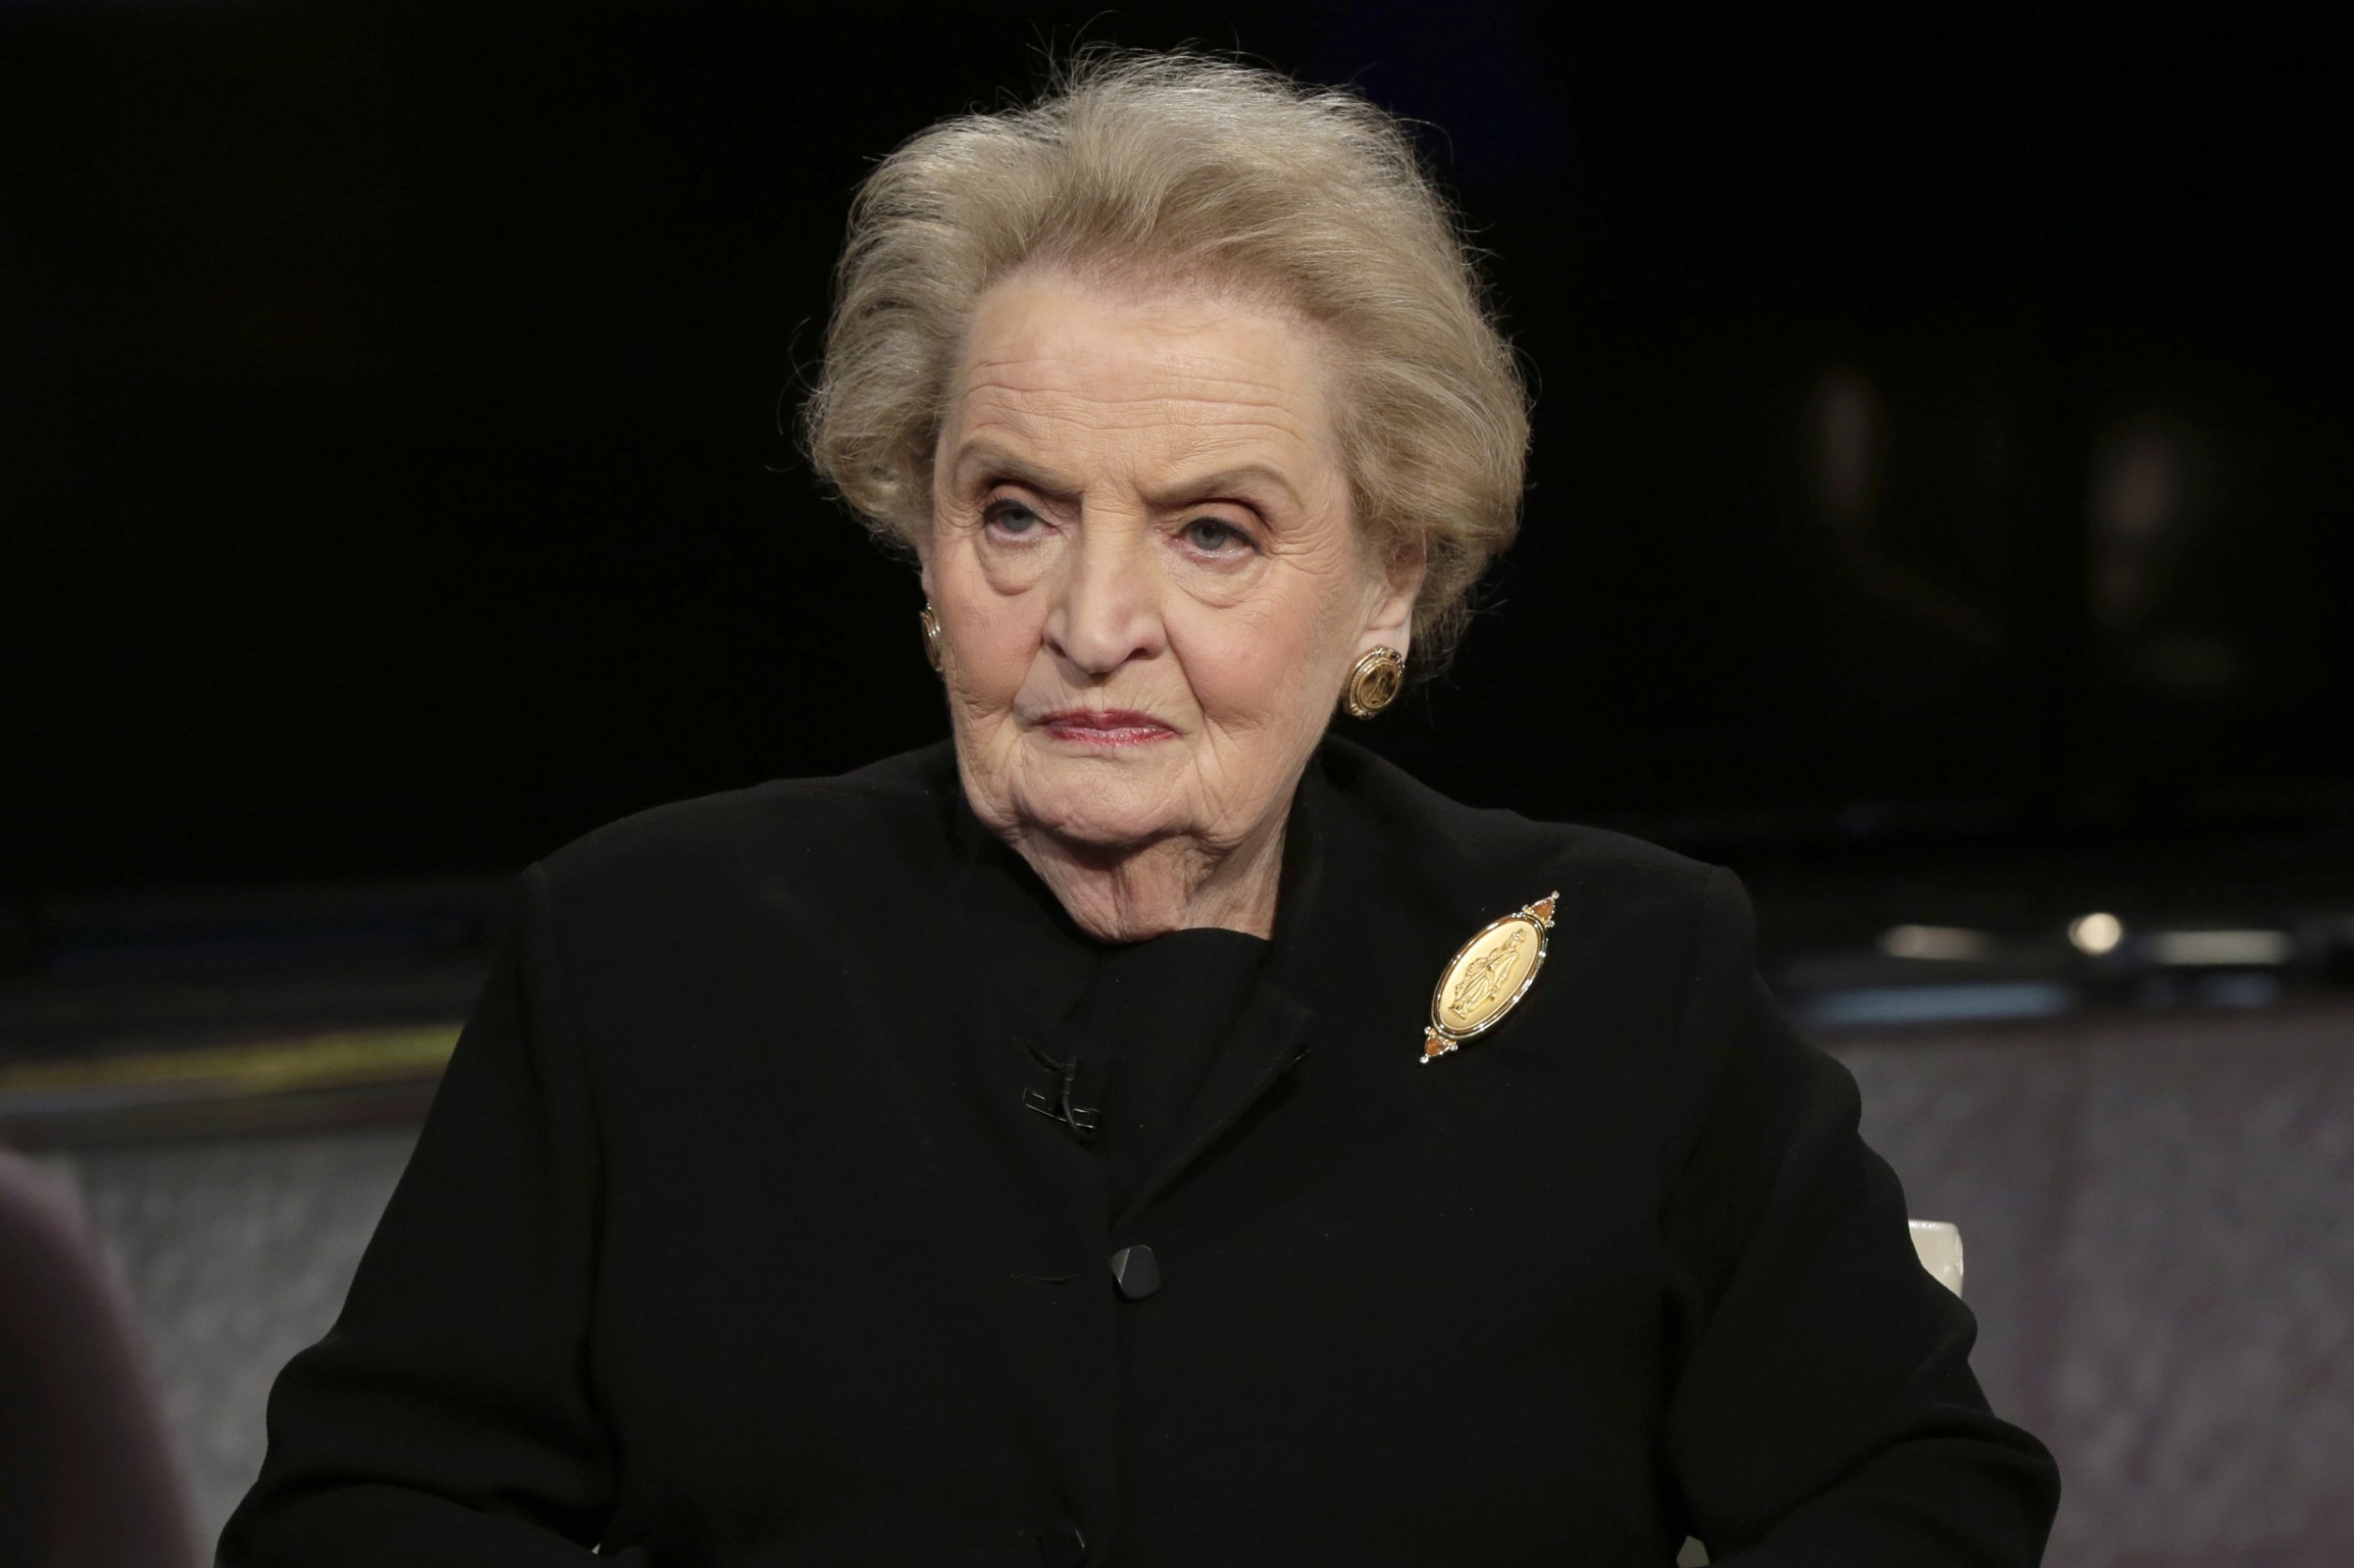 Former U.S. Secretary of State Madeleine Albright is interviewed by Maria Bartiromo on her "Mornings with Maria" program on the Fox Business Network, in New York Wednesday, March 2, 2016. (AP Photo/Richard Drew)